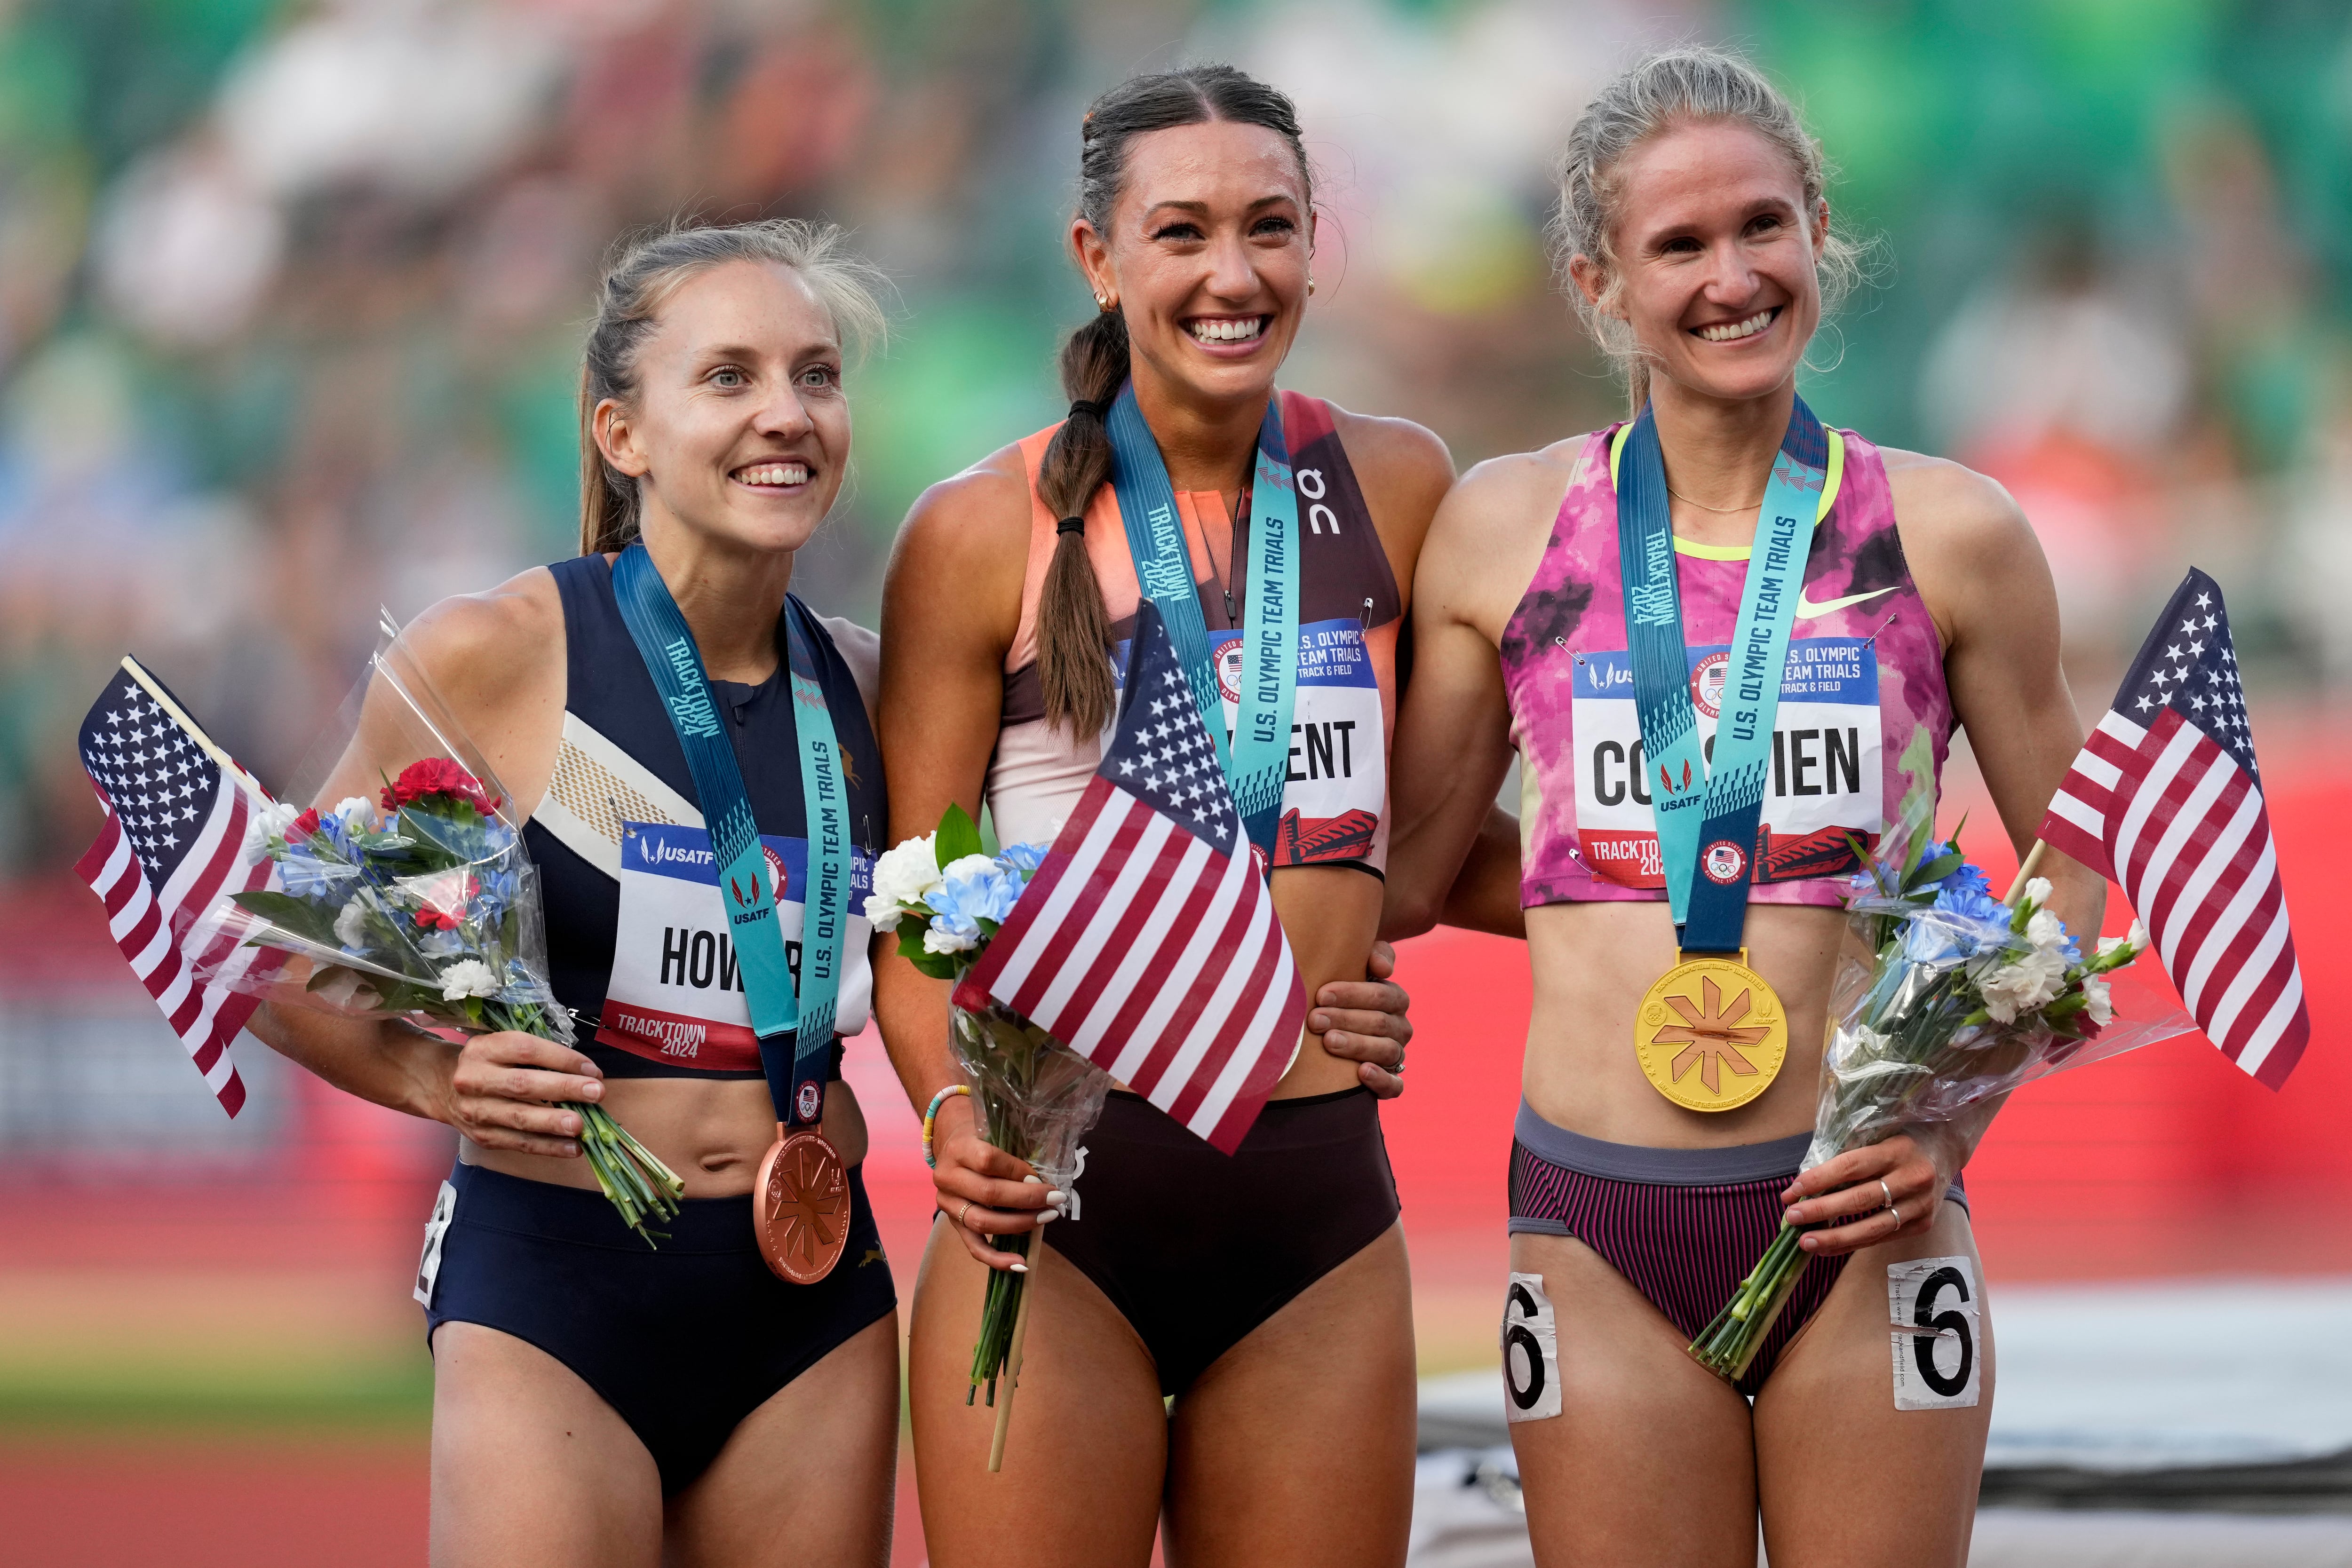 (Charlie Neibergall | AP) From right, Valerie Constien, Courtney Wayment and Marisa Howard pose after the women's 3000-meter steeplechase final during the U.S. Track and Field Olympic Team Trials Thursday, June 27, 2024, in Eugene, Ore.